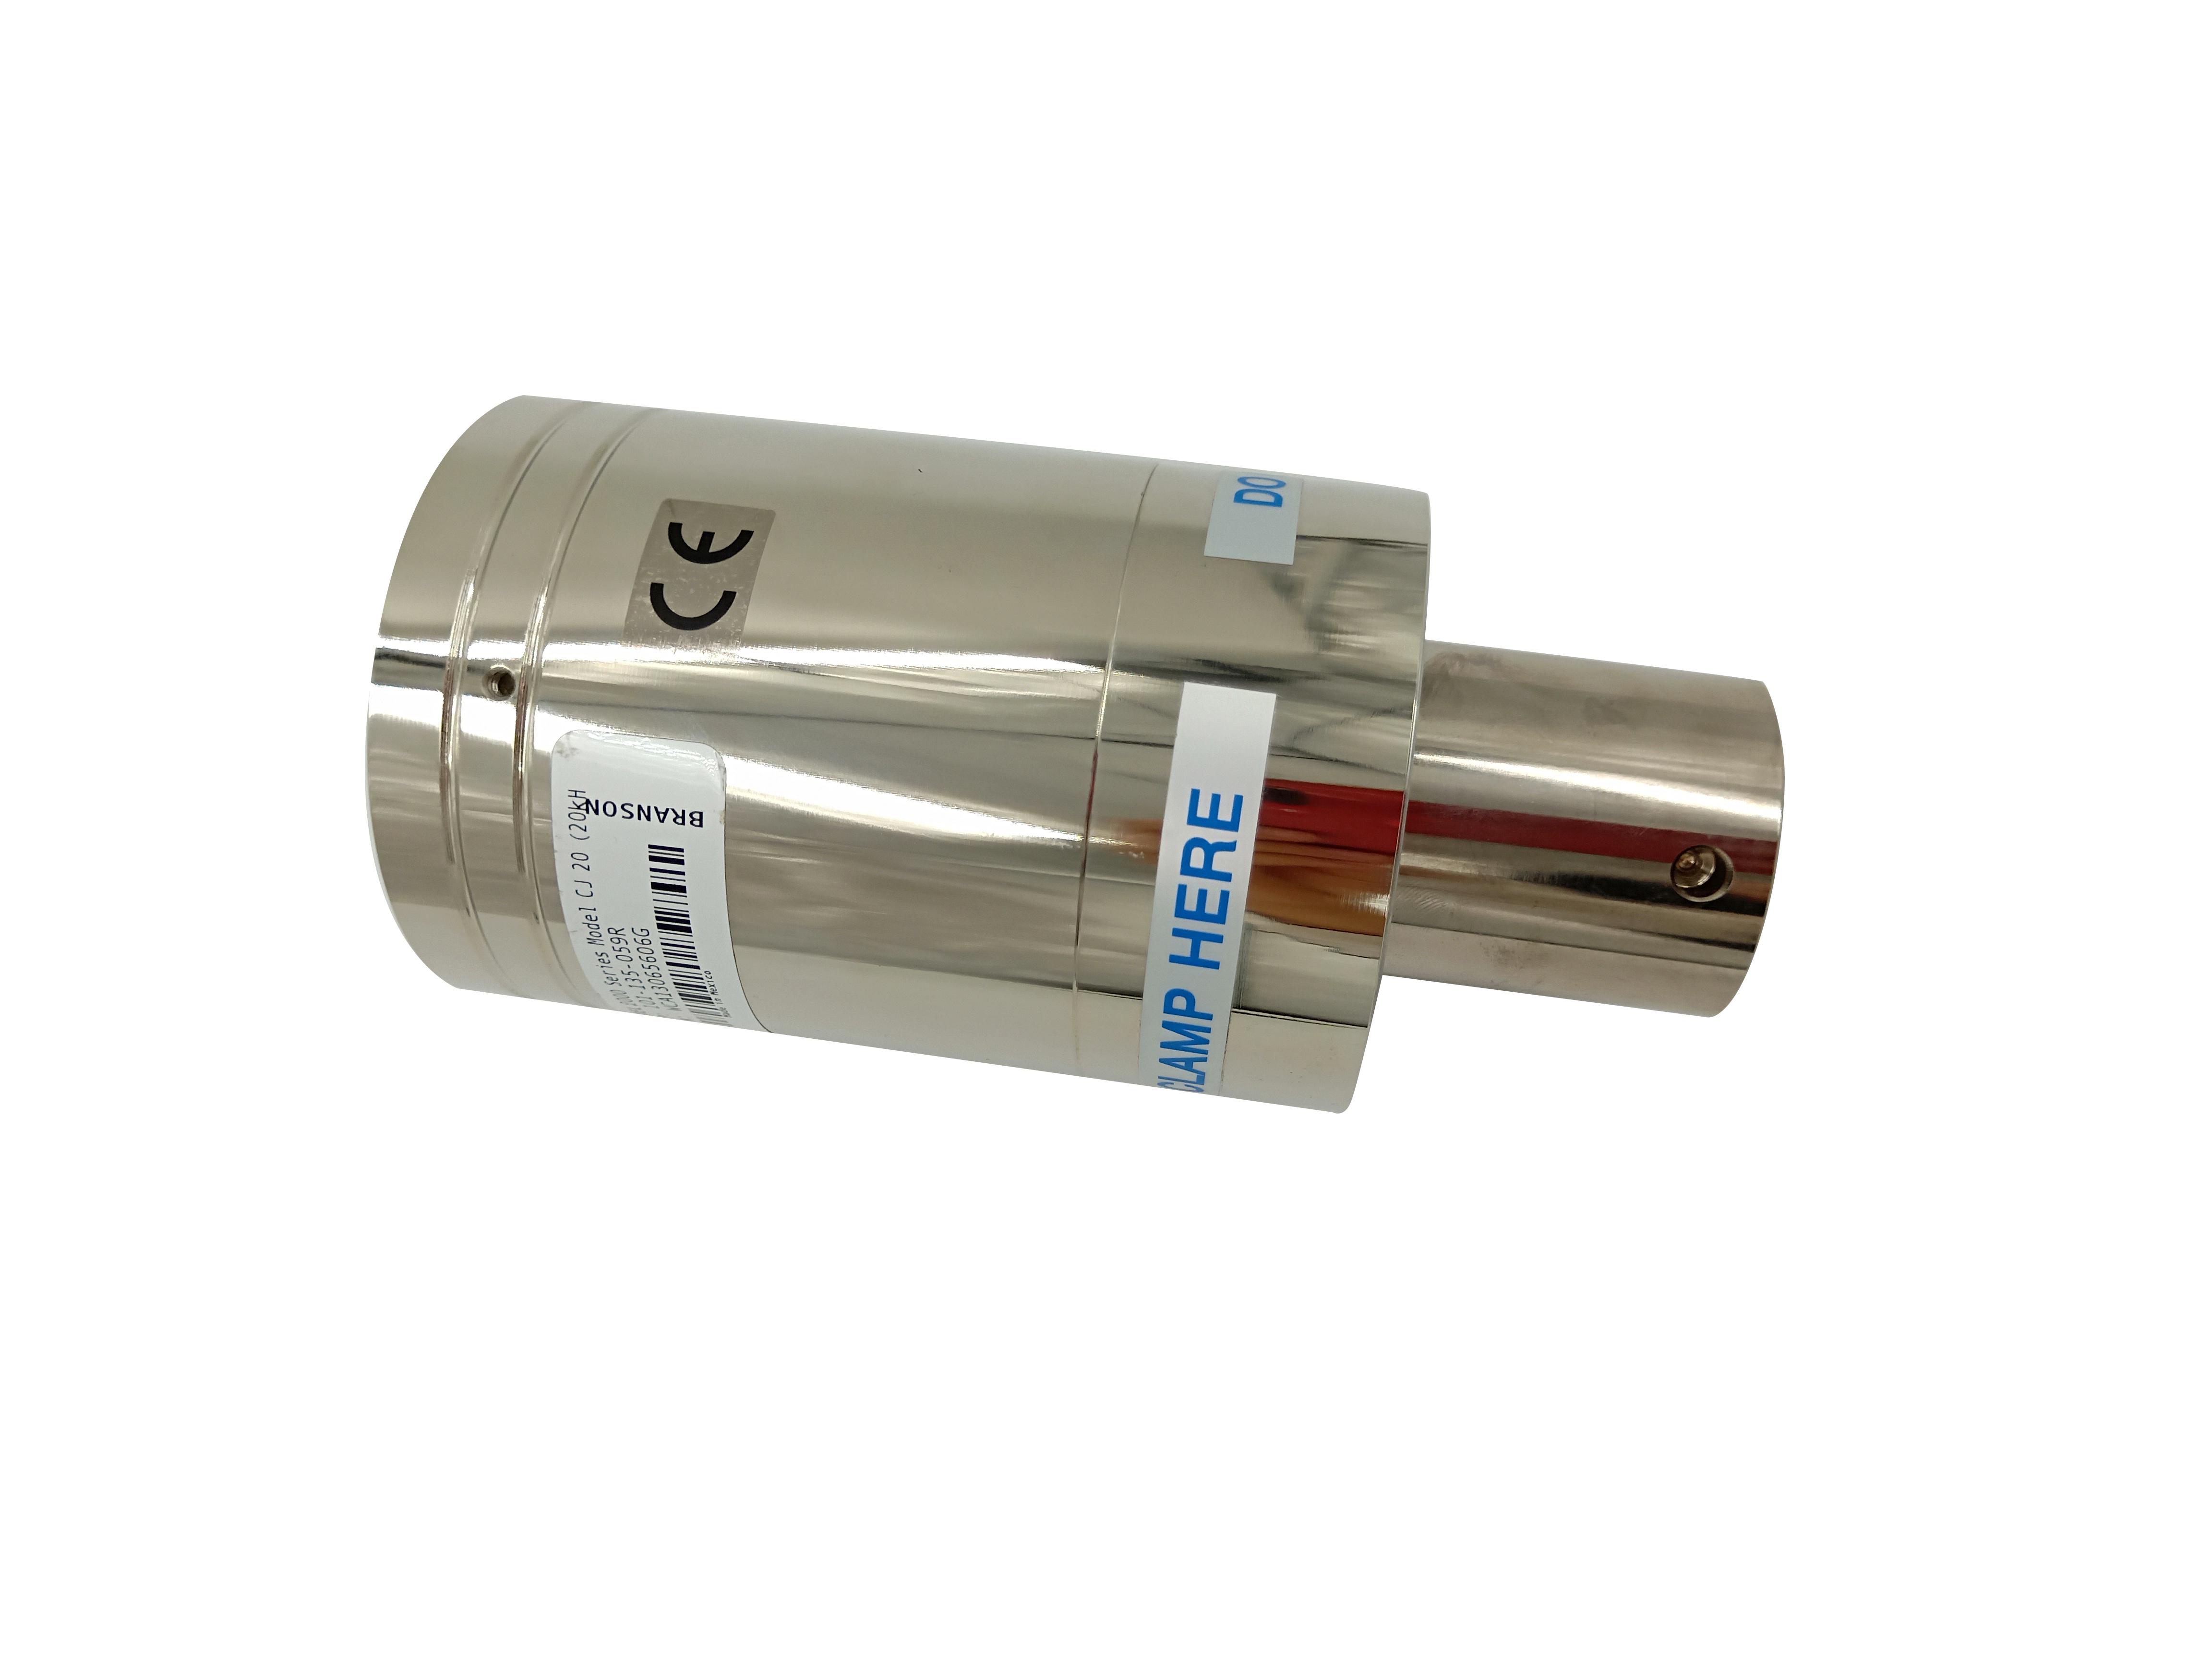 Titanium Ultrasonic Booster With Horn For Branson CJ20 Ultrasonic Welding Connect